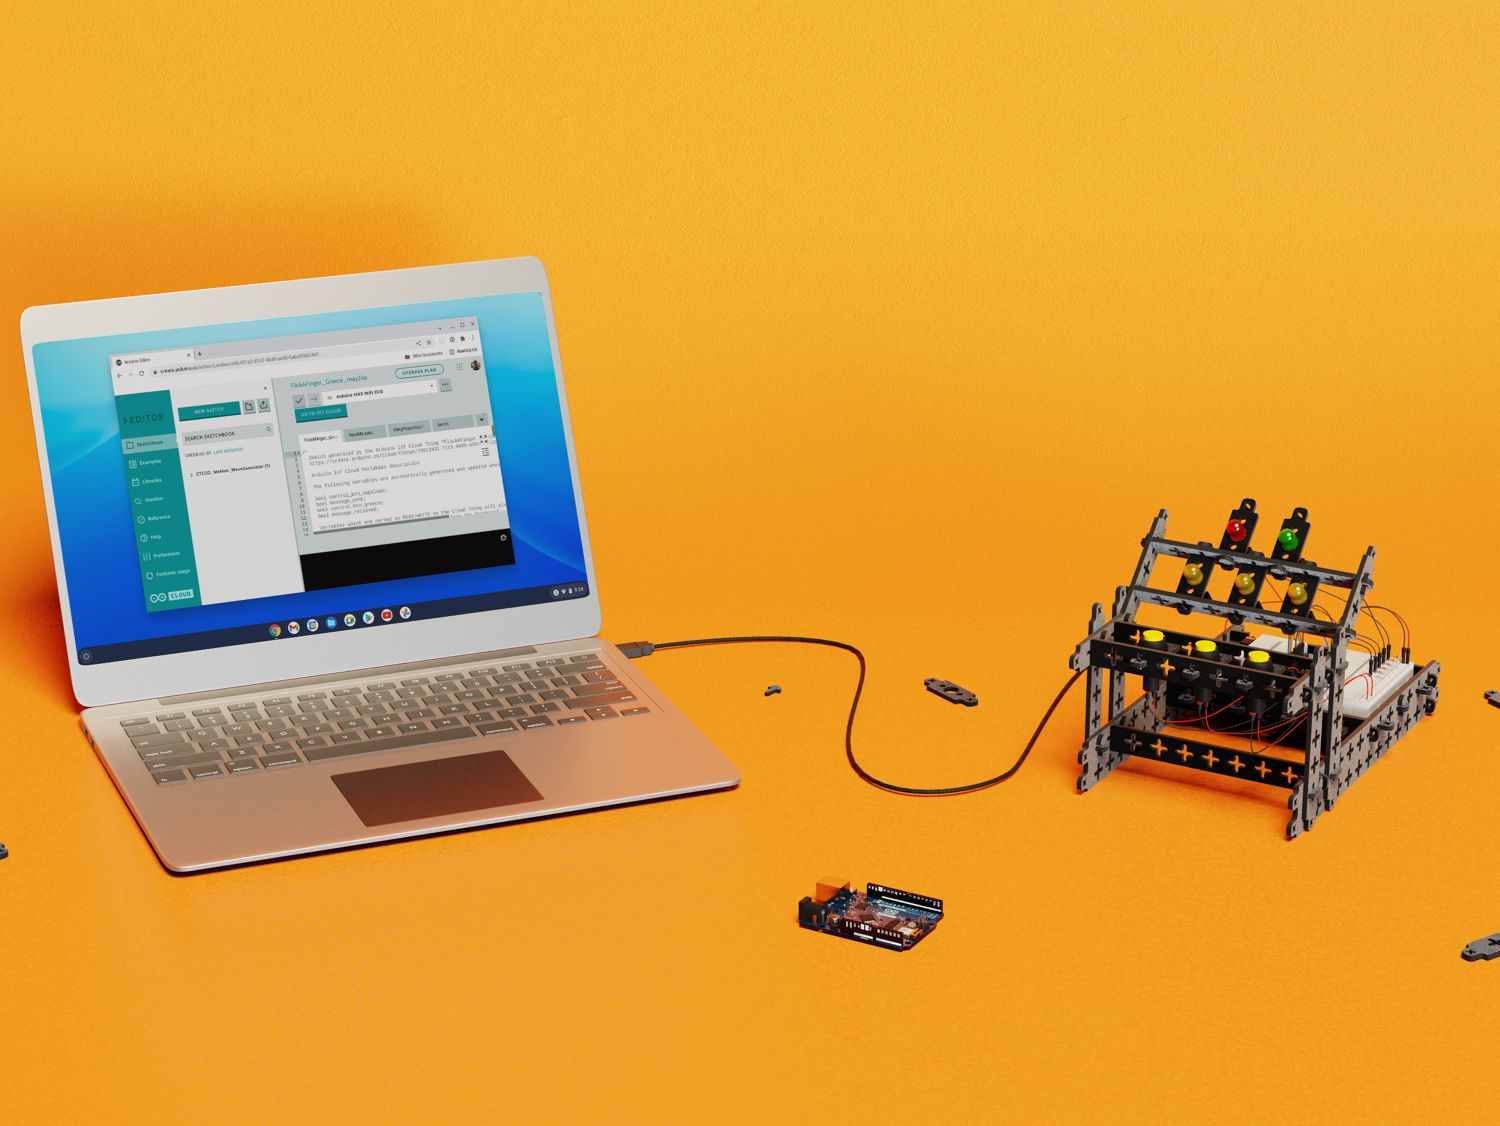 Arduino CTC GO! is now compatible with Chromebooks